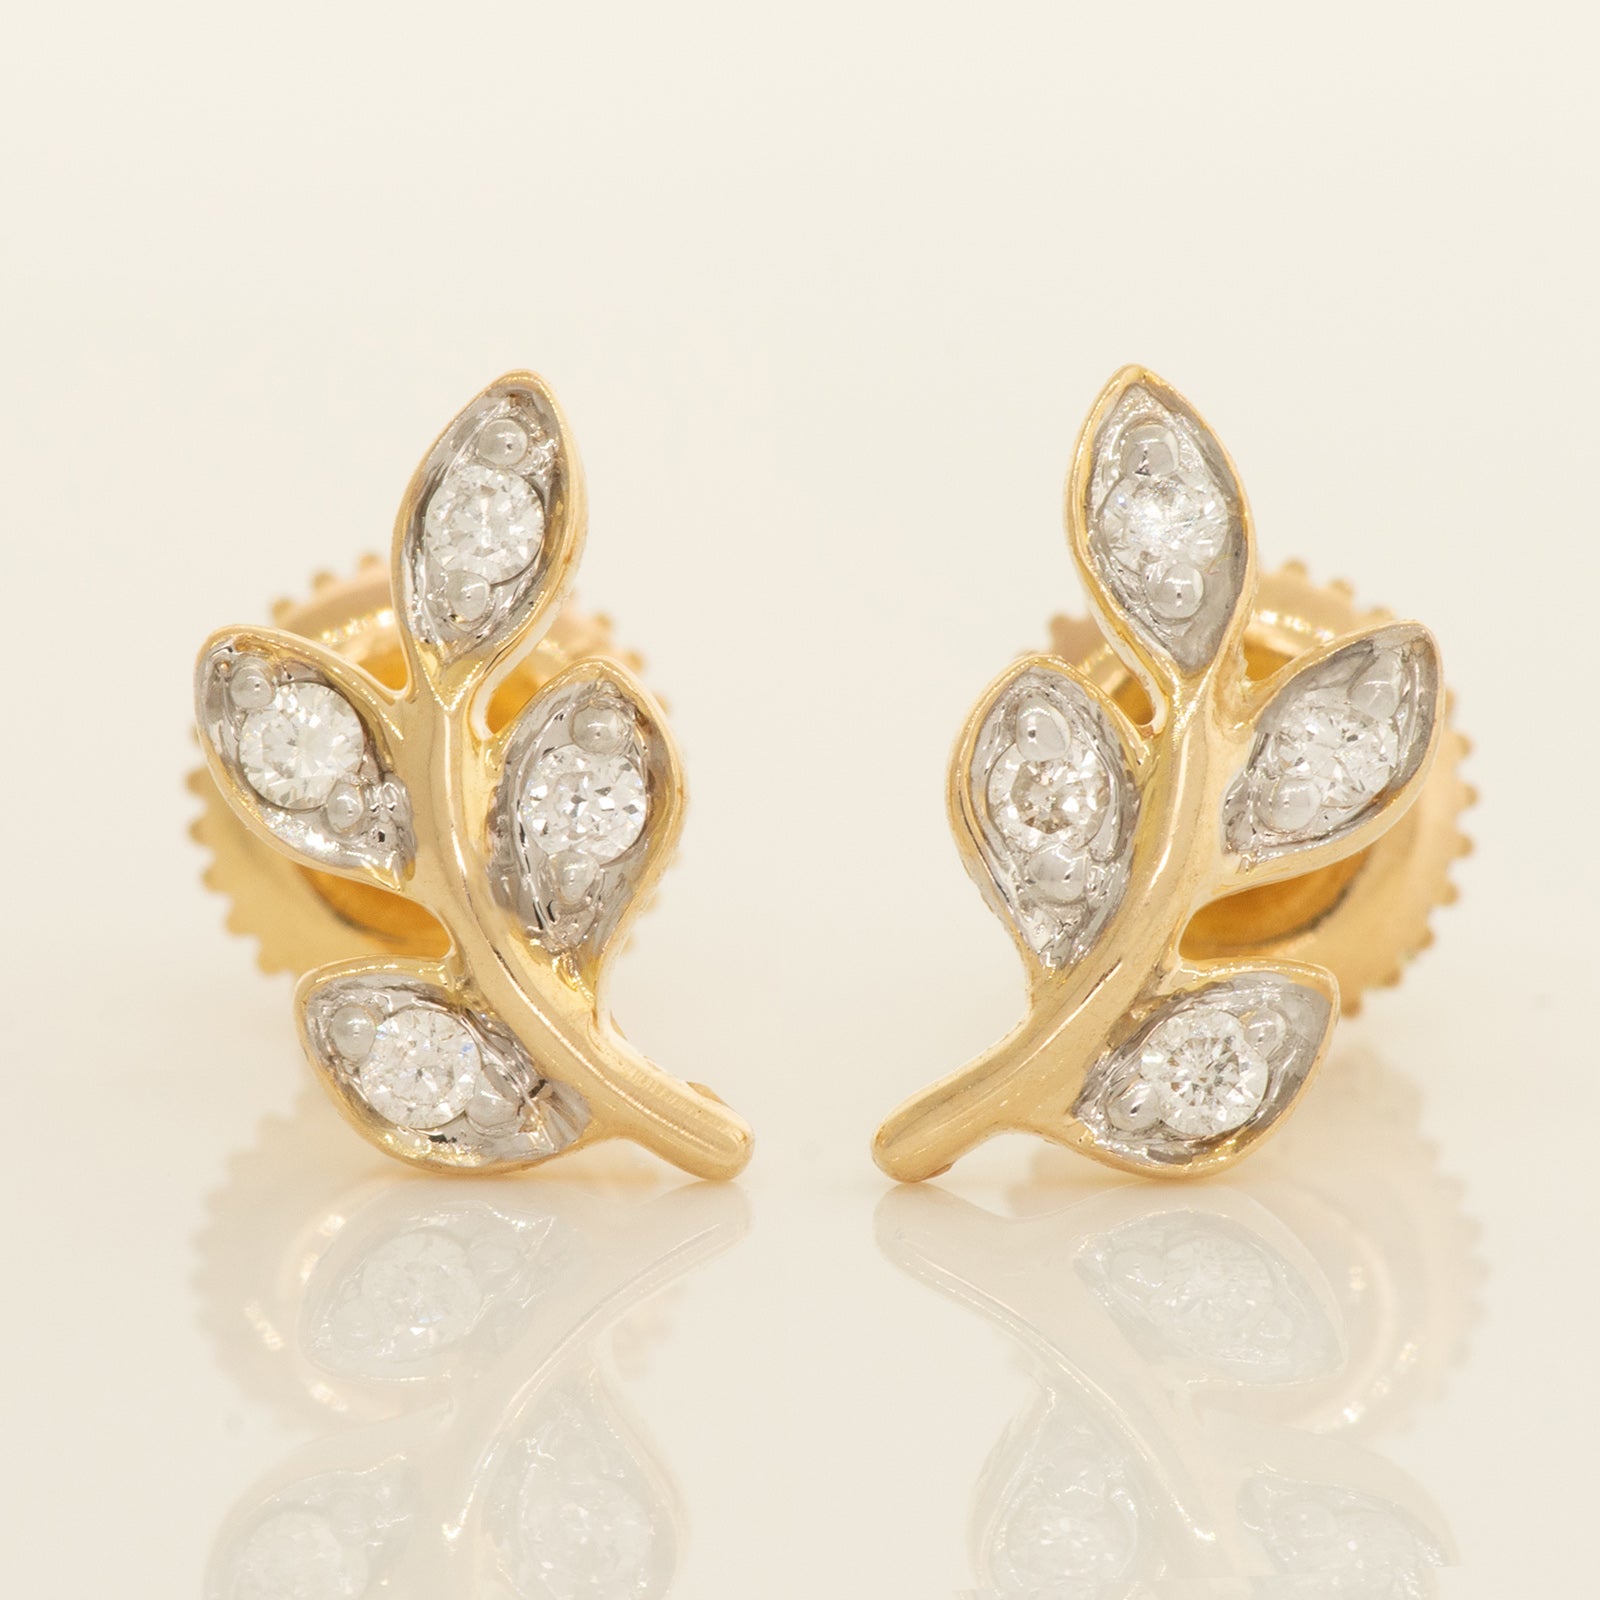 14K Solid Gold Diamond Olive Leaf Stud Earrings - Anygolds